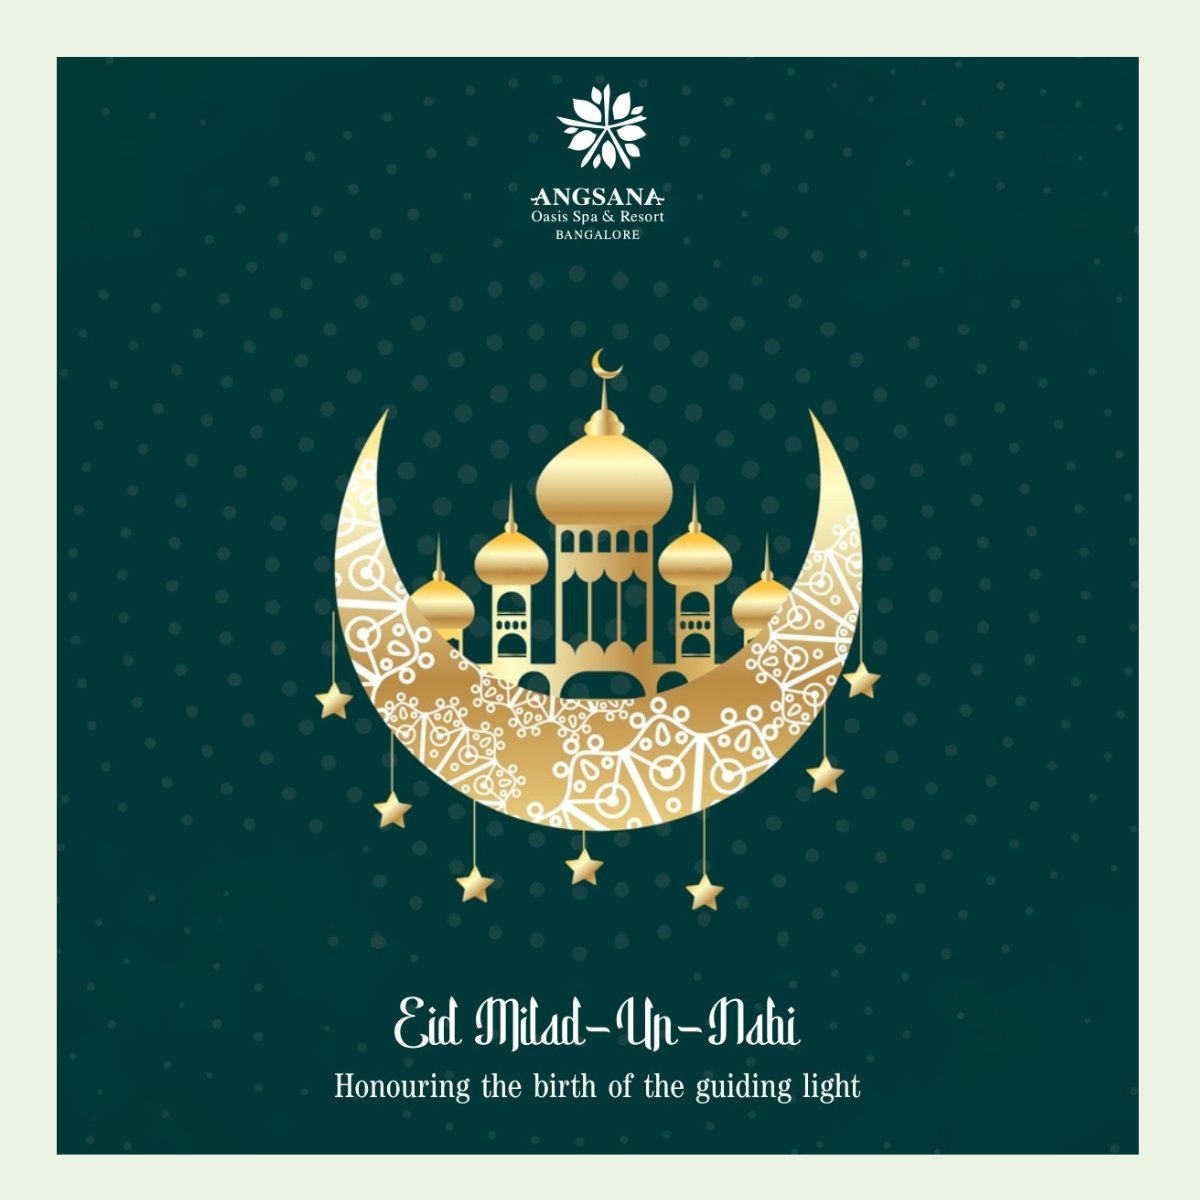 May the grace of this auspicious day bring blessings and joy to your heart. Team Angsana Oasis Spa and Resort wishes you an auspicious Eid Milad Un Nabi. 

#AngsanaOasisSpaAndResort #AngsanaHotels #SenseTheMoment #BanyanTreeHotels #BanyanTreeHotelsAndResorts #EidMiladUnNabi